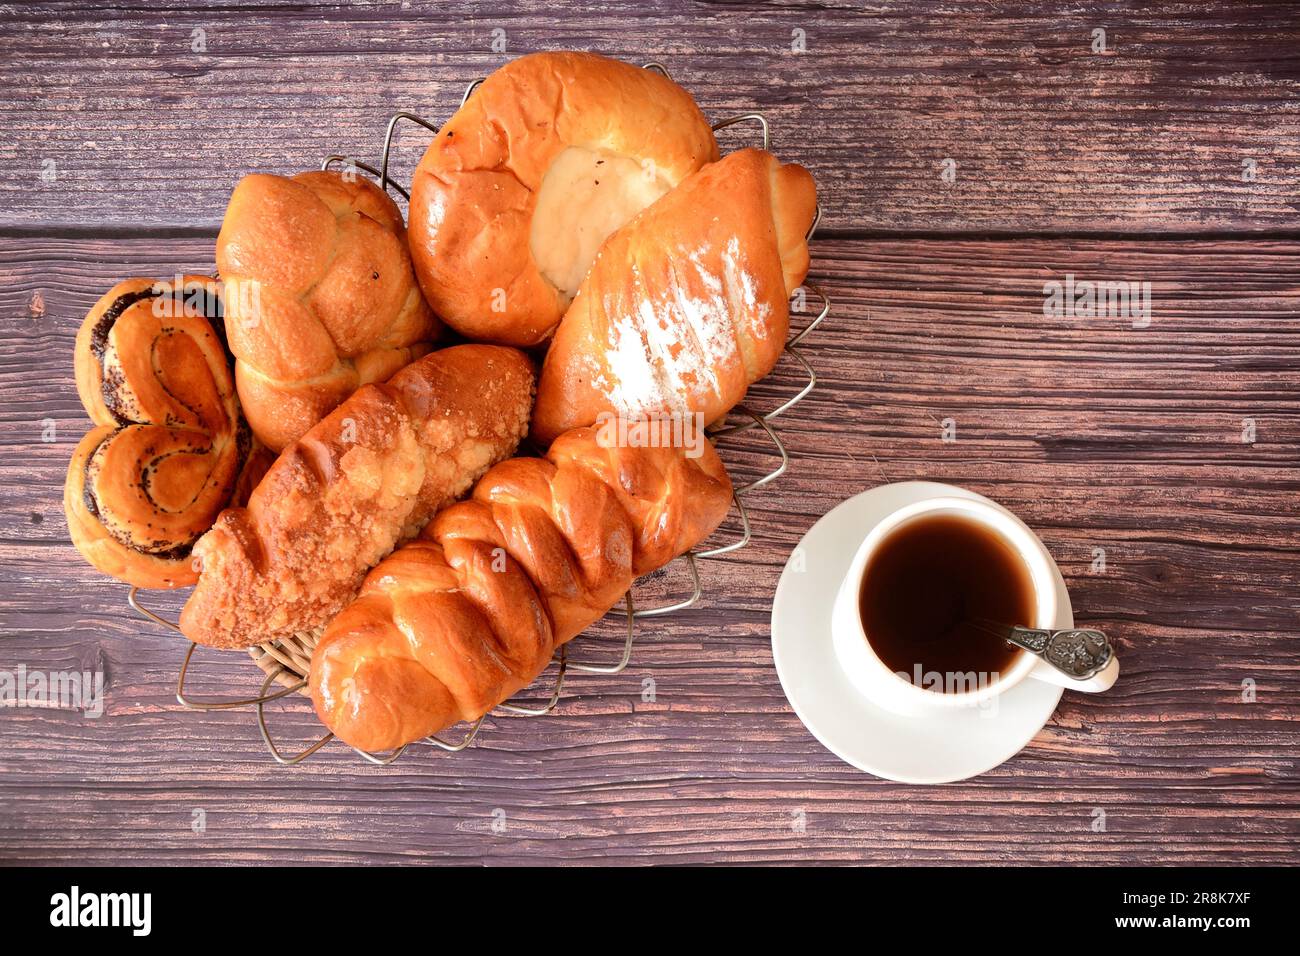 Wooden dark table with a cup of hot tea and a wicker basket with a variety of pastries. Top view, flat lay. Stock Photo